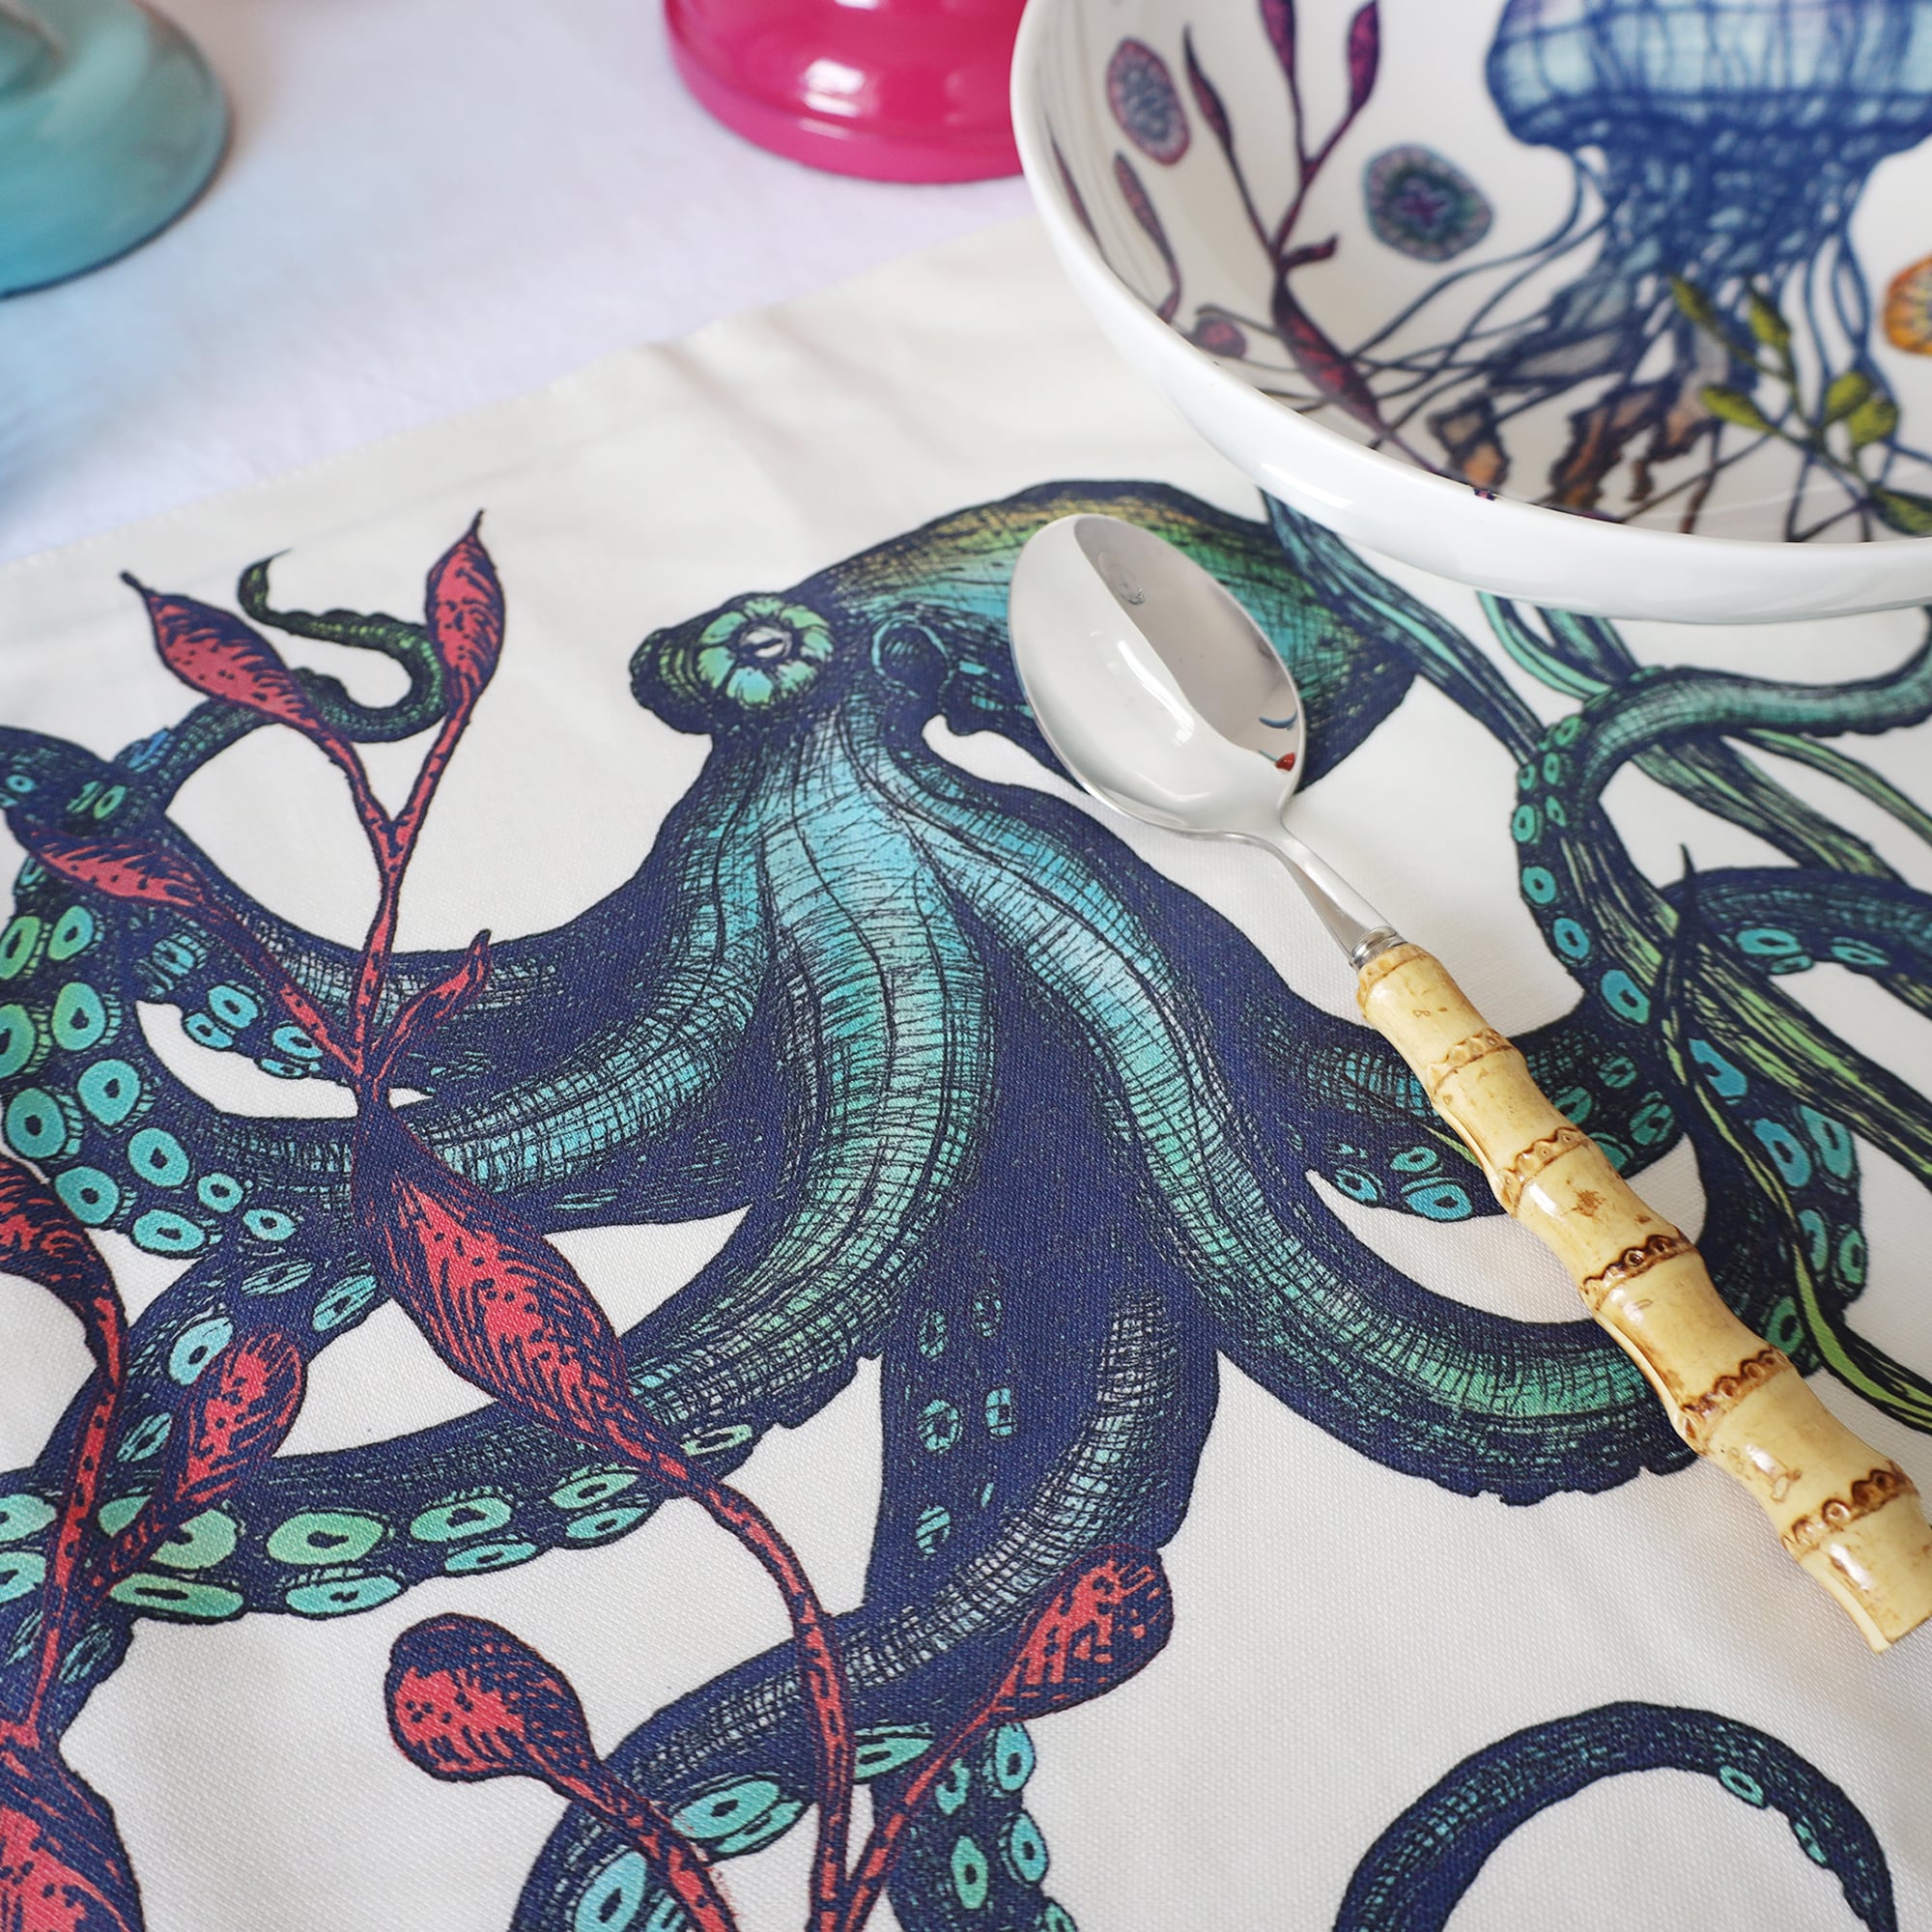 Close up of Reef design showing an octopus  placed next to a matching coaster on a tablecloth with Bamboo cutlery